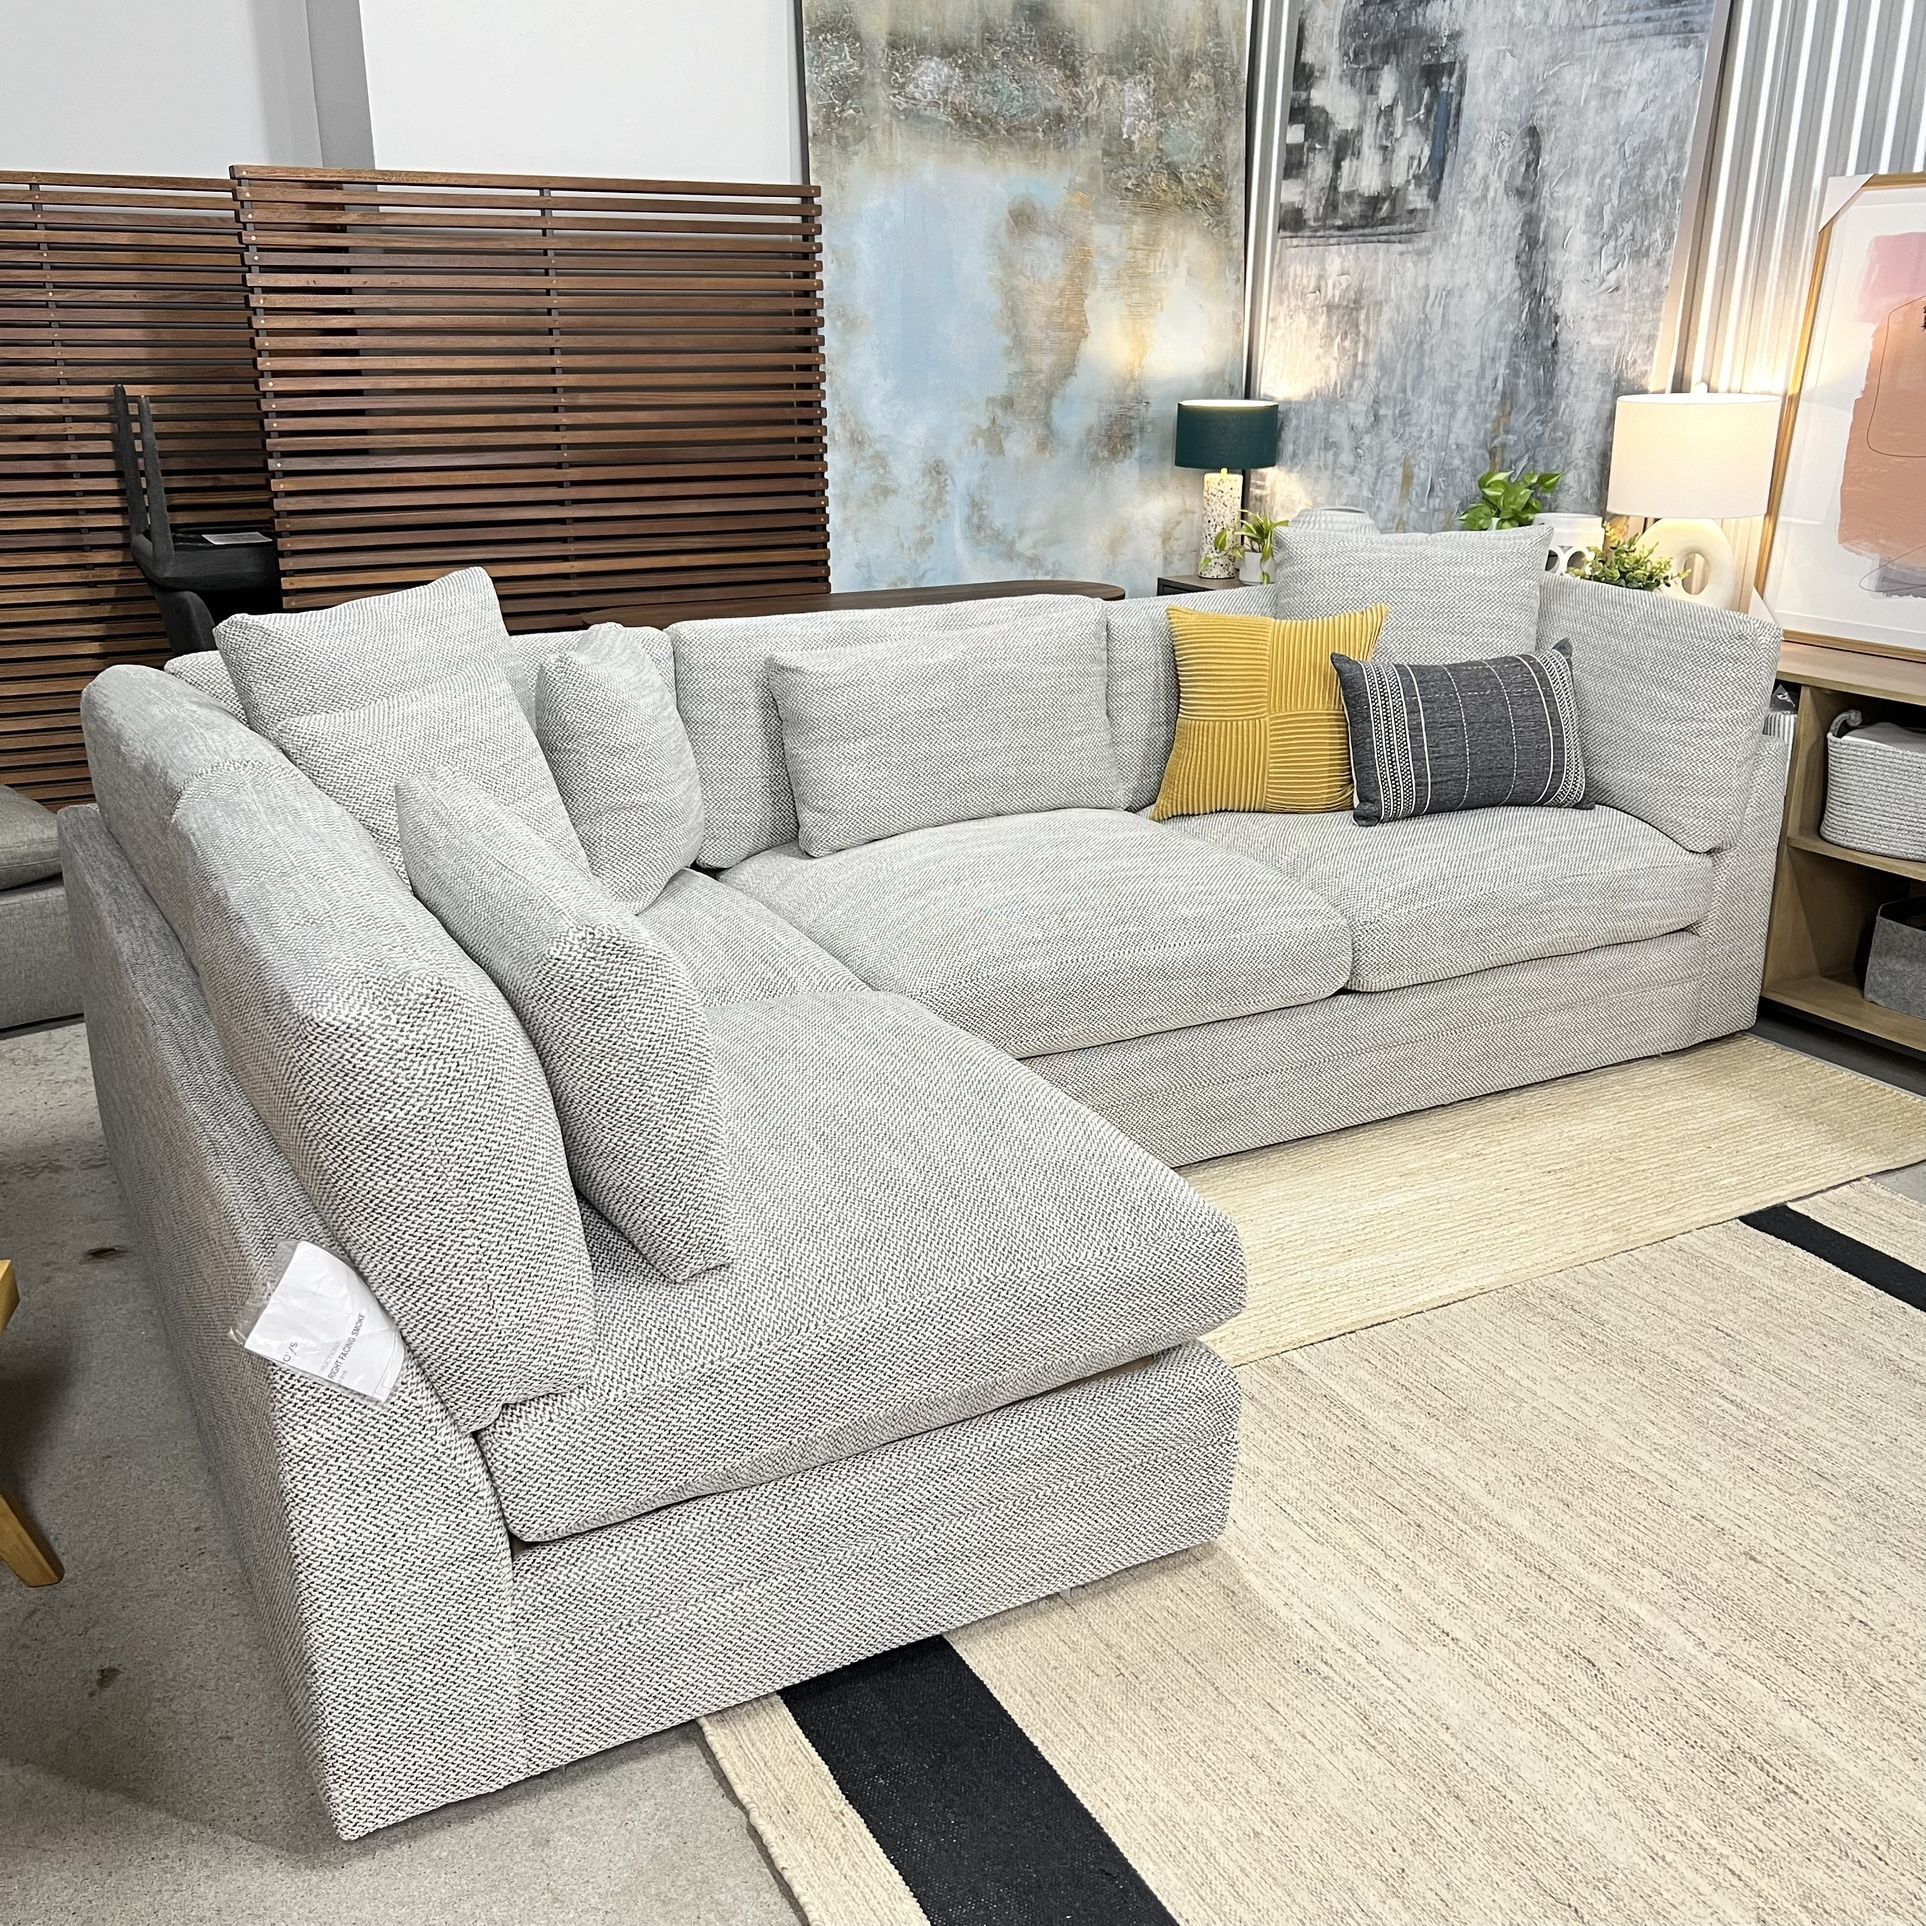 Free Delivery Brand New Sundays Sectional Couch Sofa with Chaise Performance Fabric Stain-Resistant Family-Friendly (retail price $4,500)